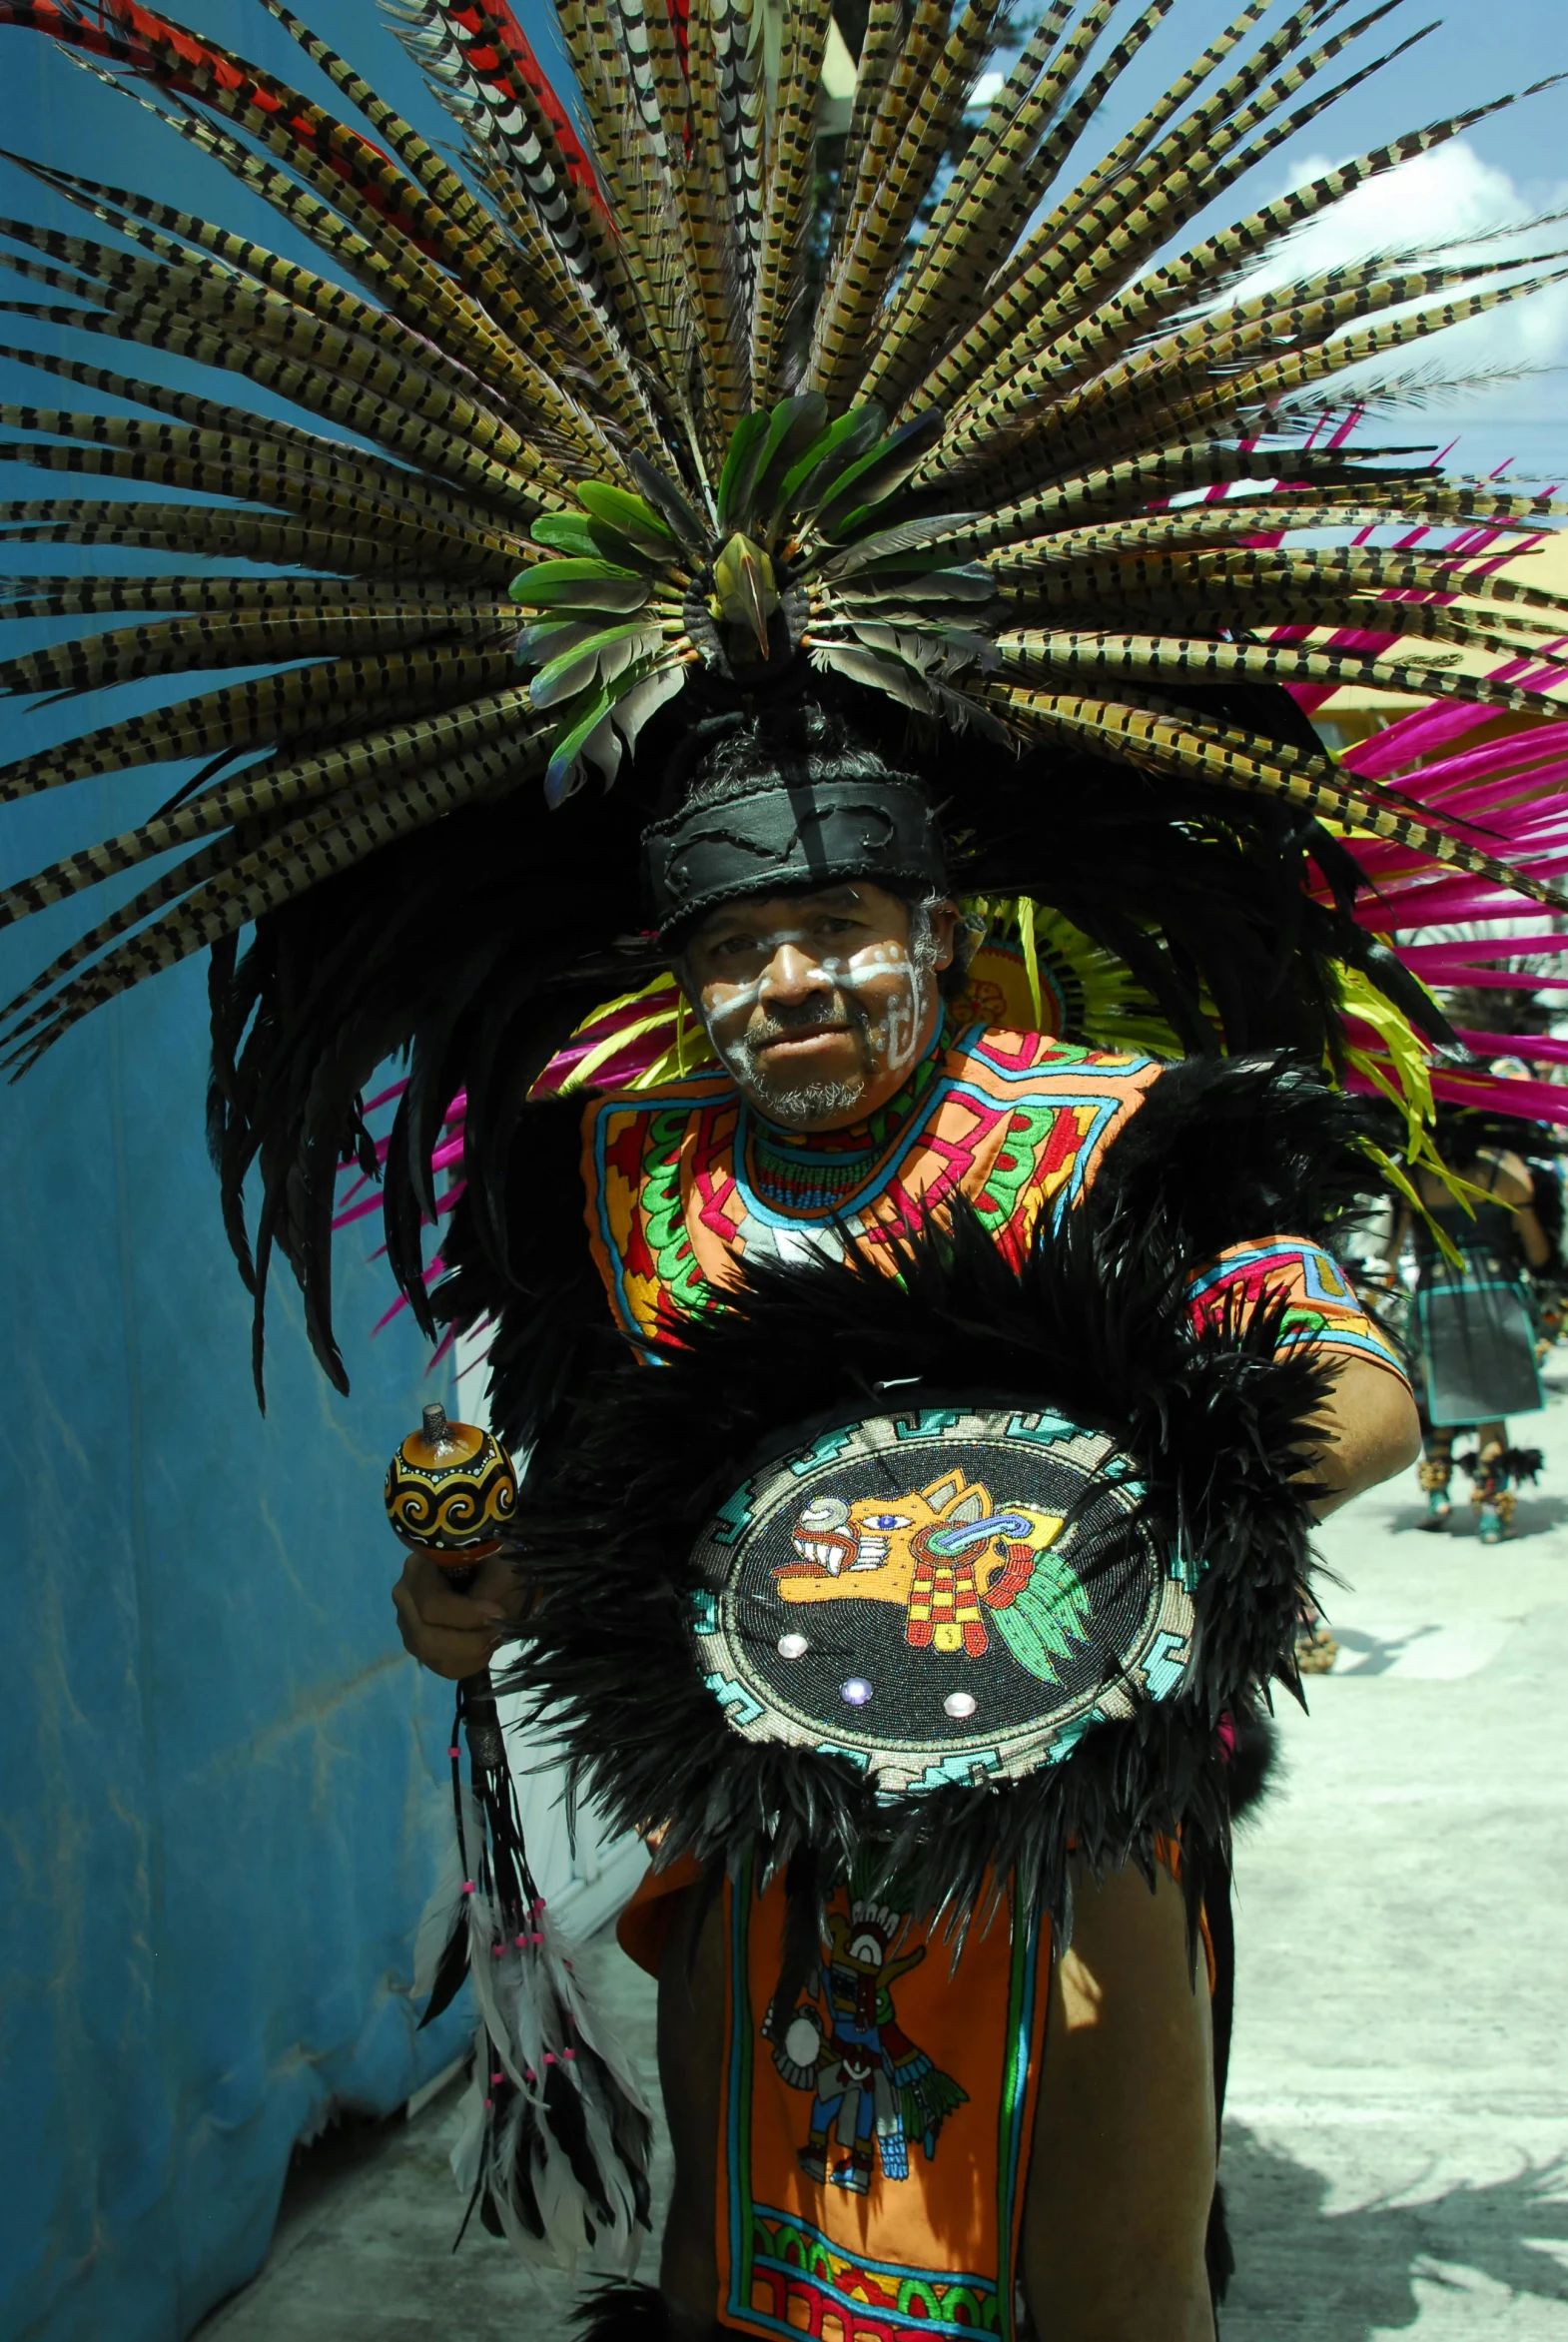 man dressed in colorful costume walking with a large feather headpiece